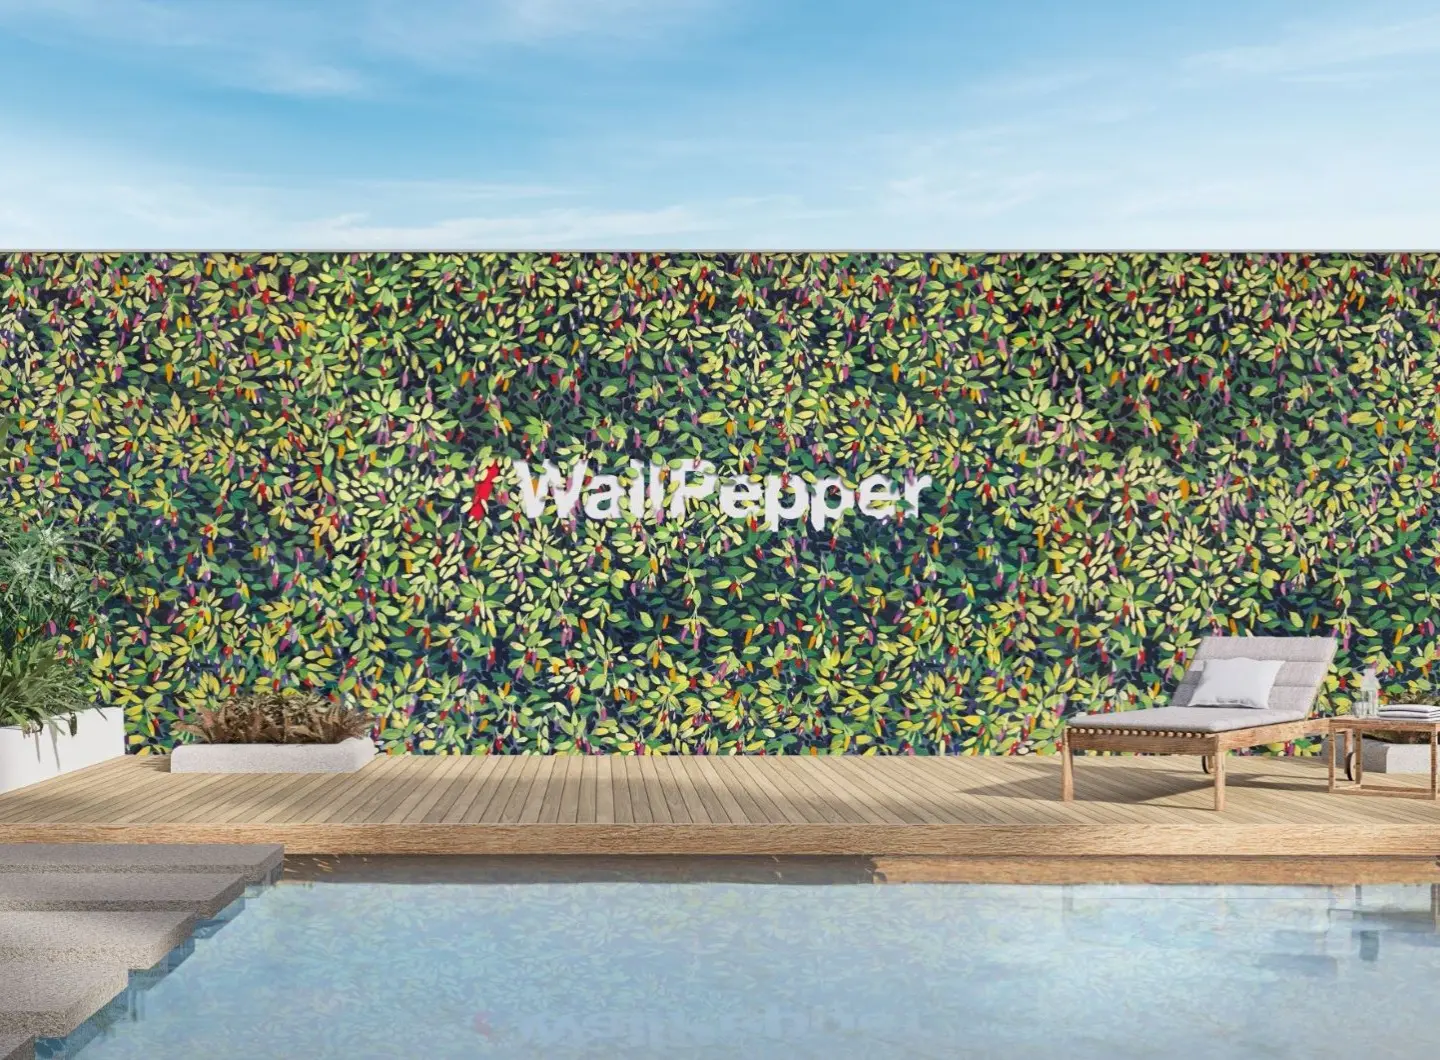 WallPepper®/Group Collezione 10 years